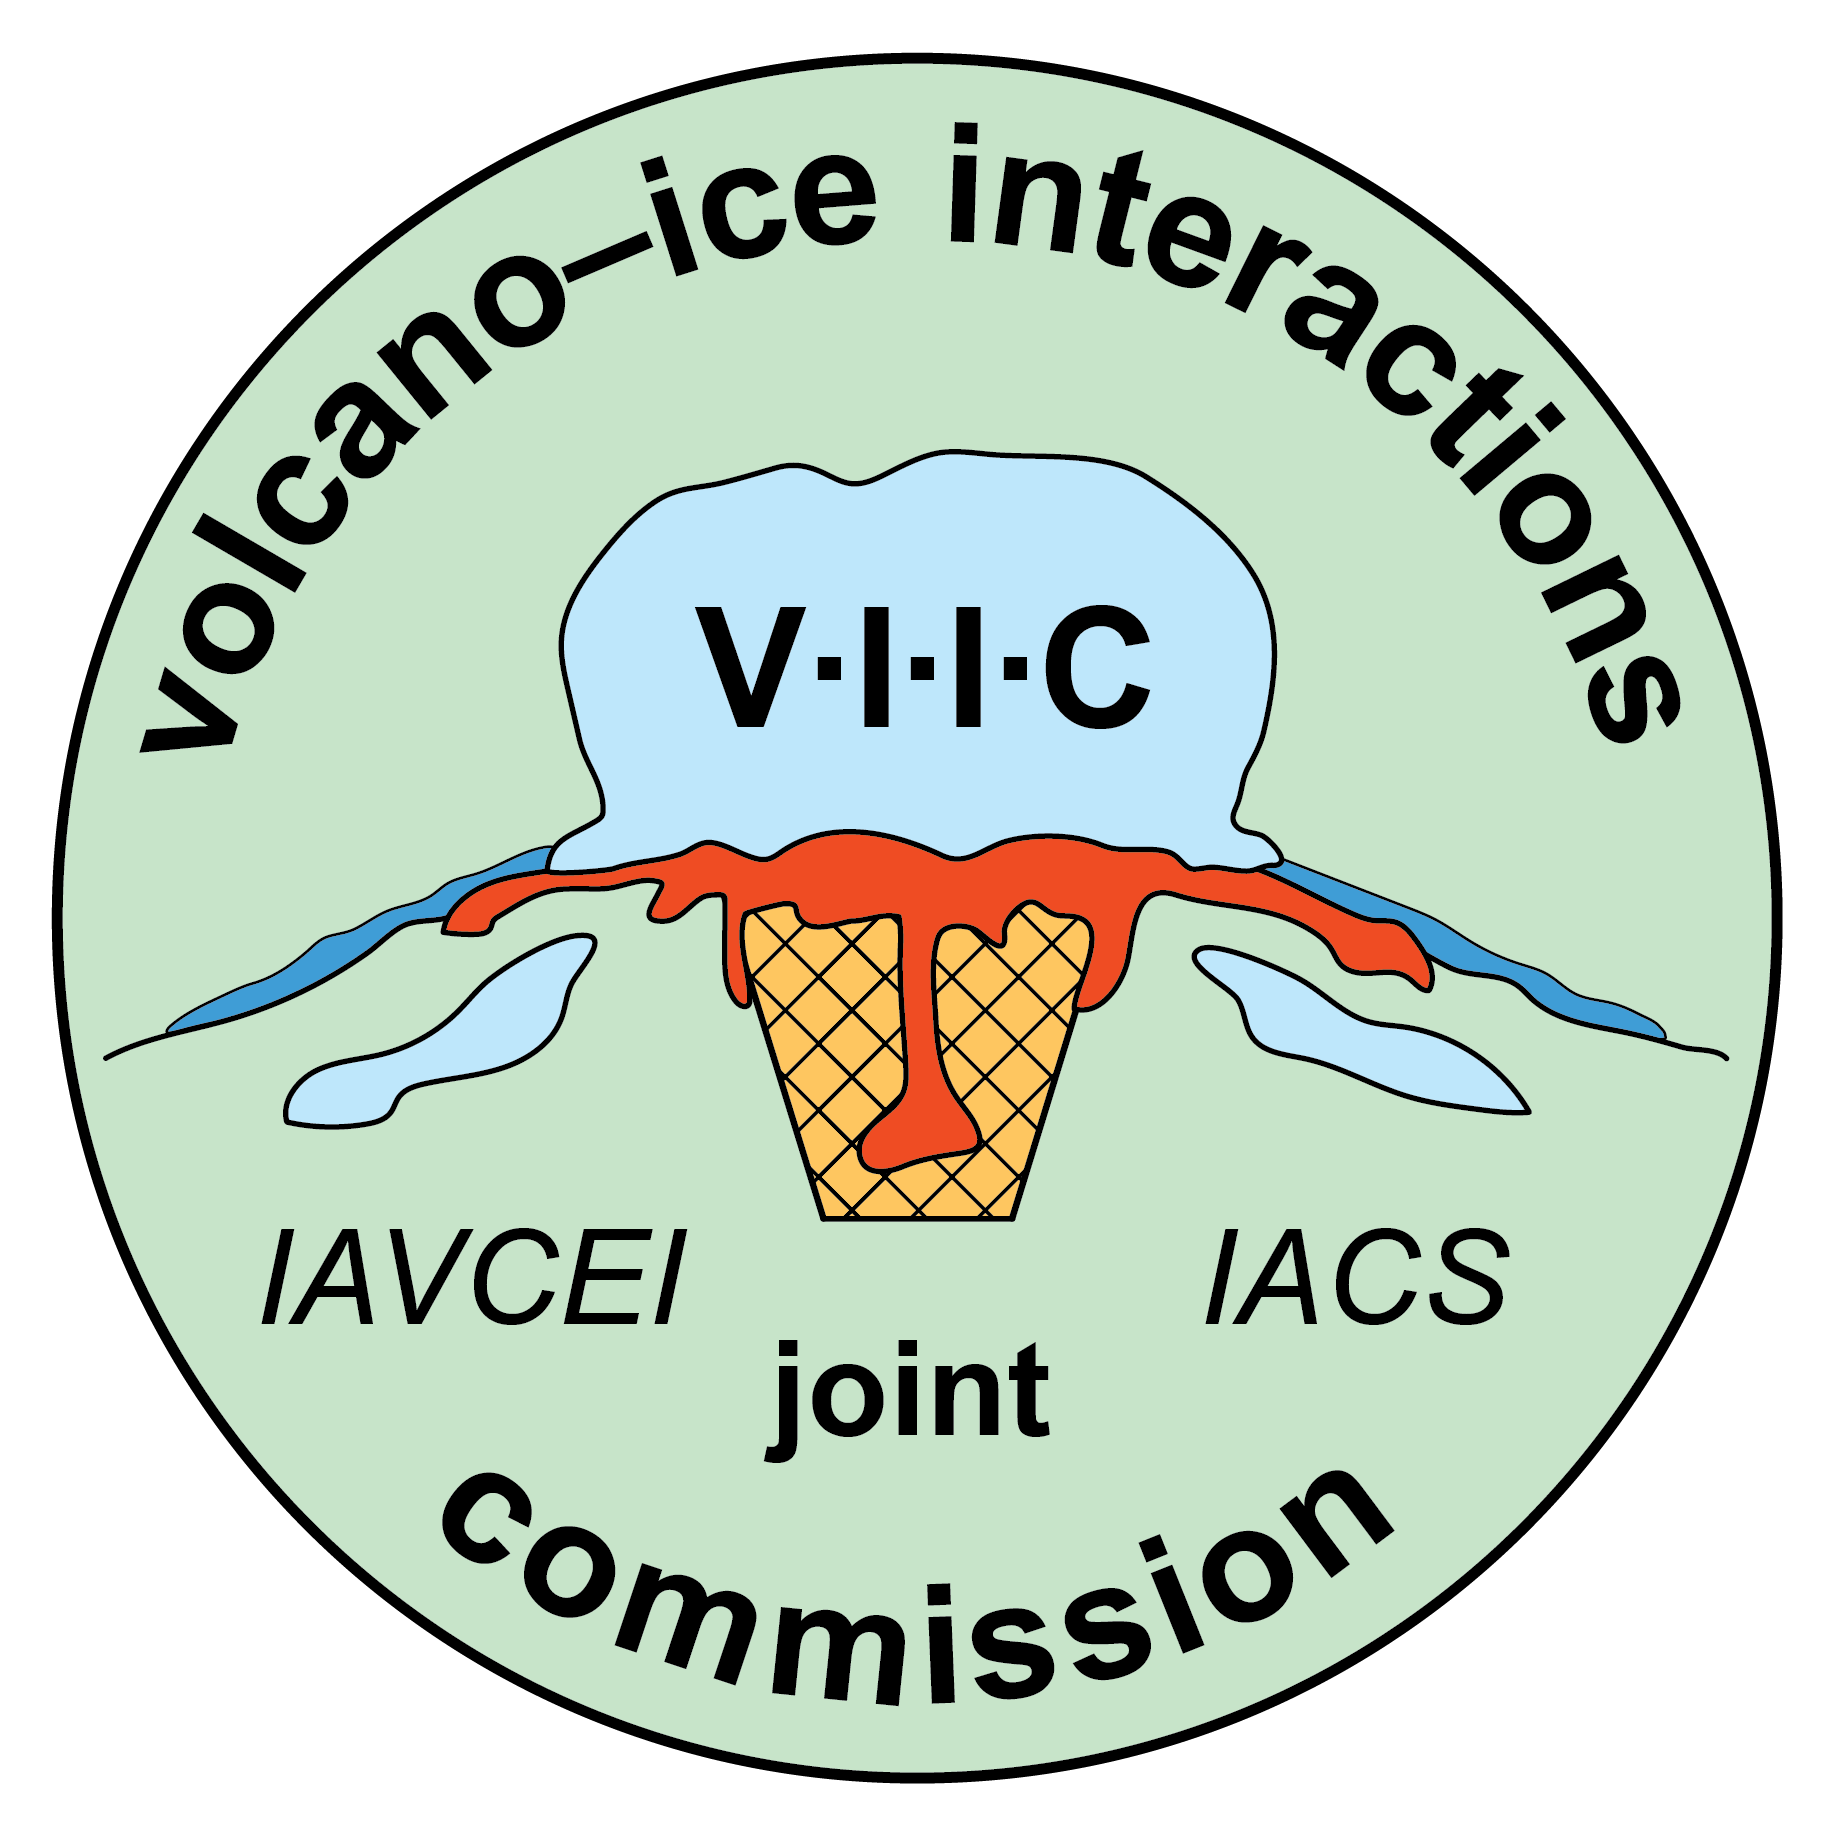 Volcano-ice Interactions Commission